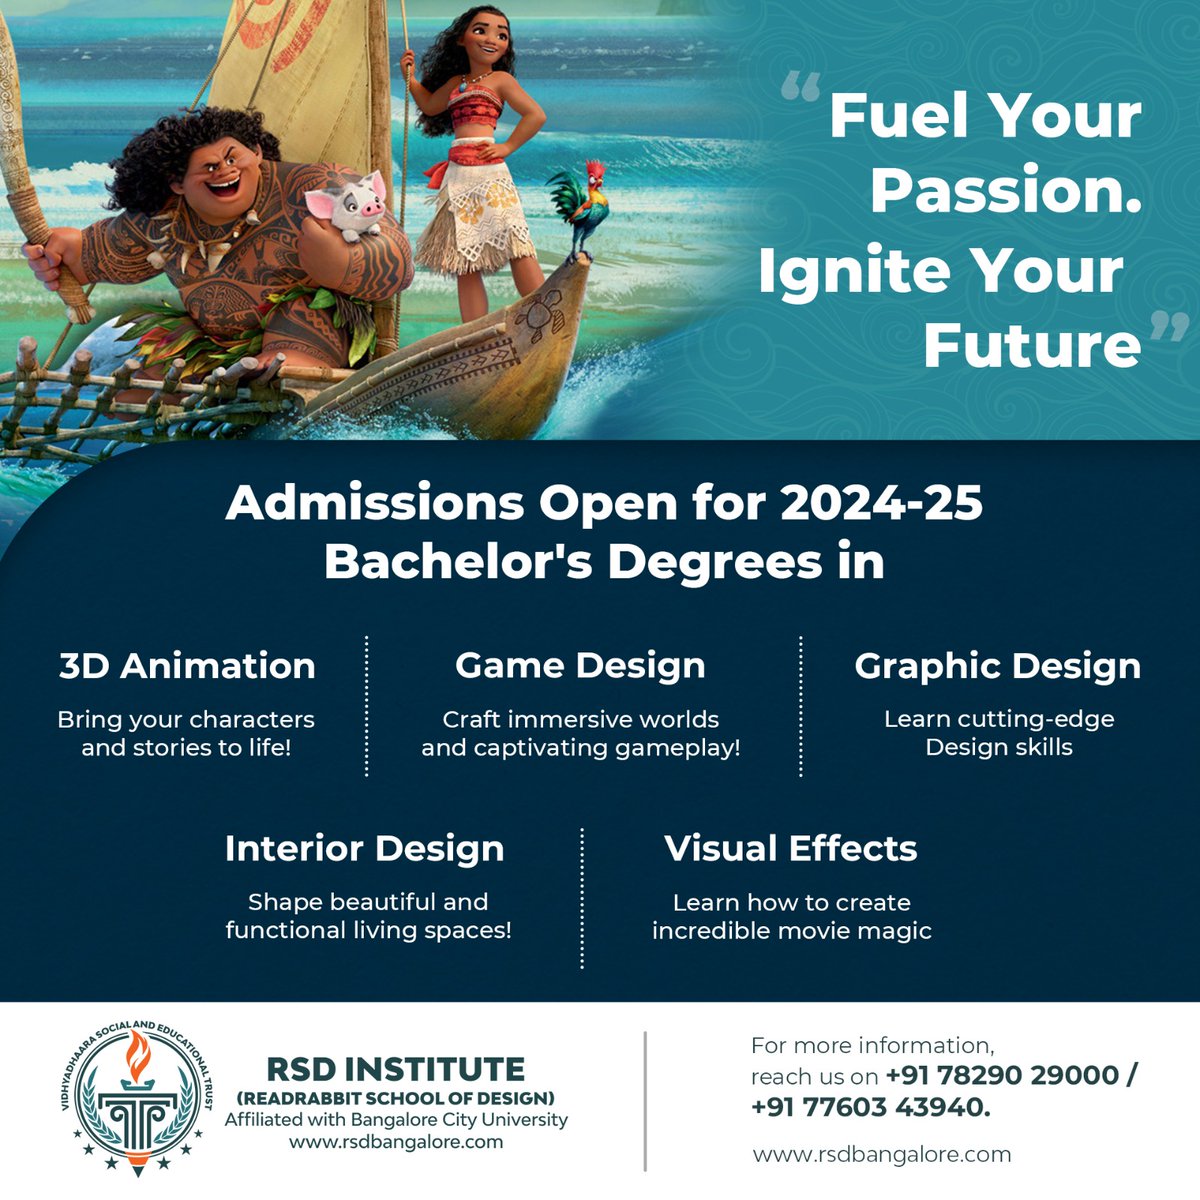 Fuel your Passion. Ignite your Future. Build a career in Animation, VFX, Graphic designing, UI UX, Motion Graphics, Interior Design. 

#rsdinstitute #animationdegrees #degreeinanimation #bachelorsdegree #degreeindesign  #bestanimationschool #animation